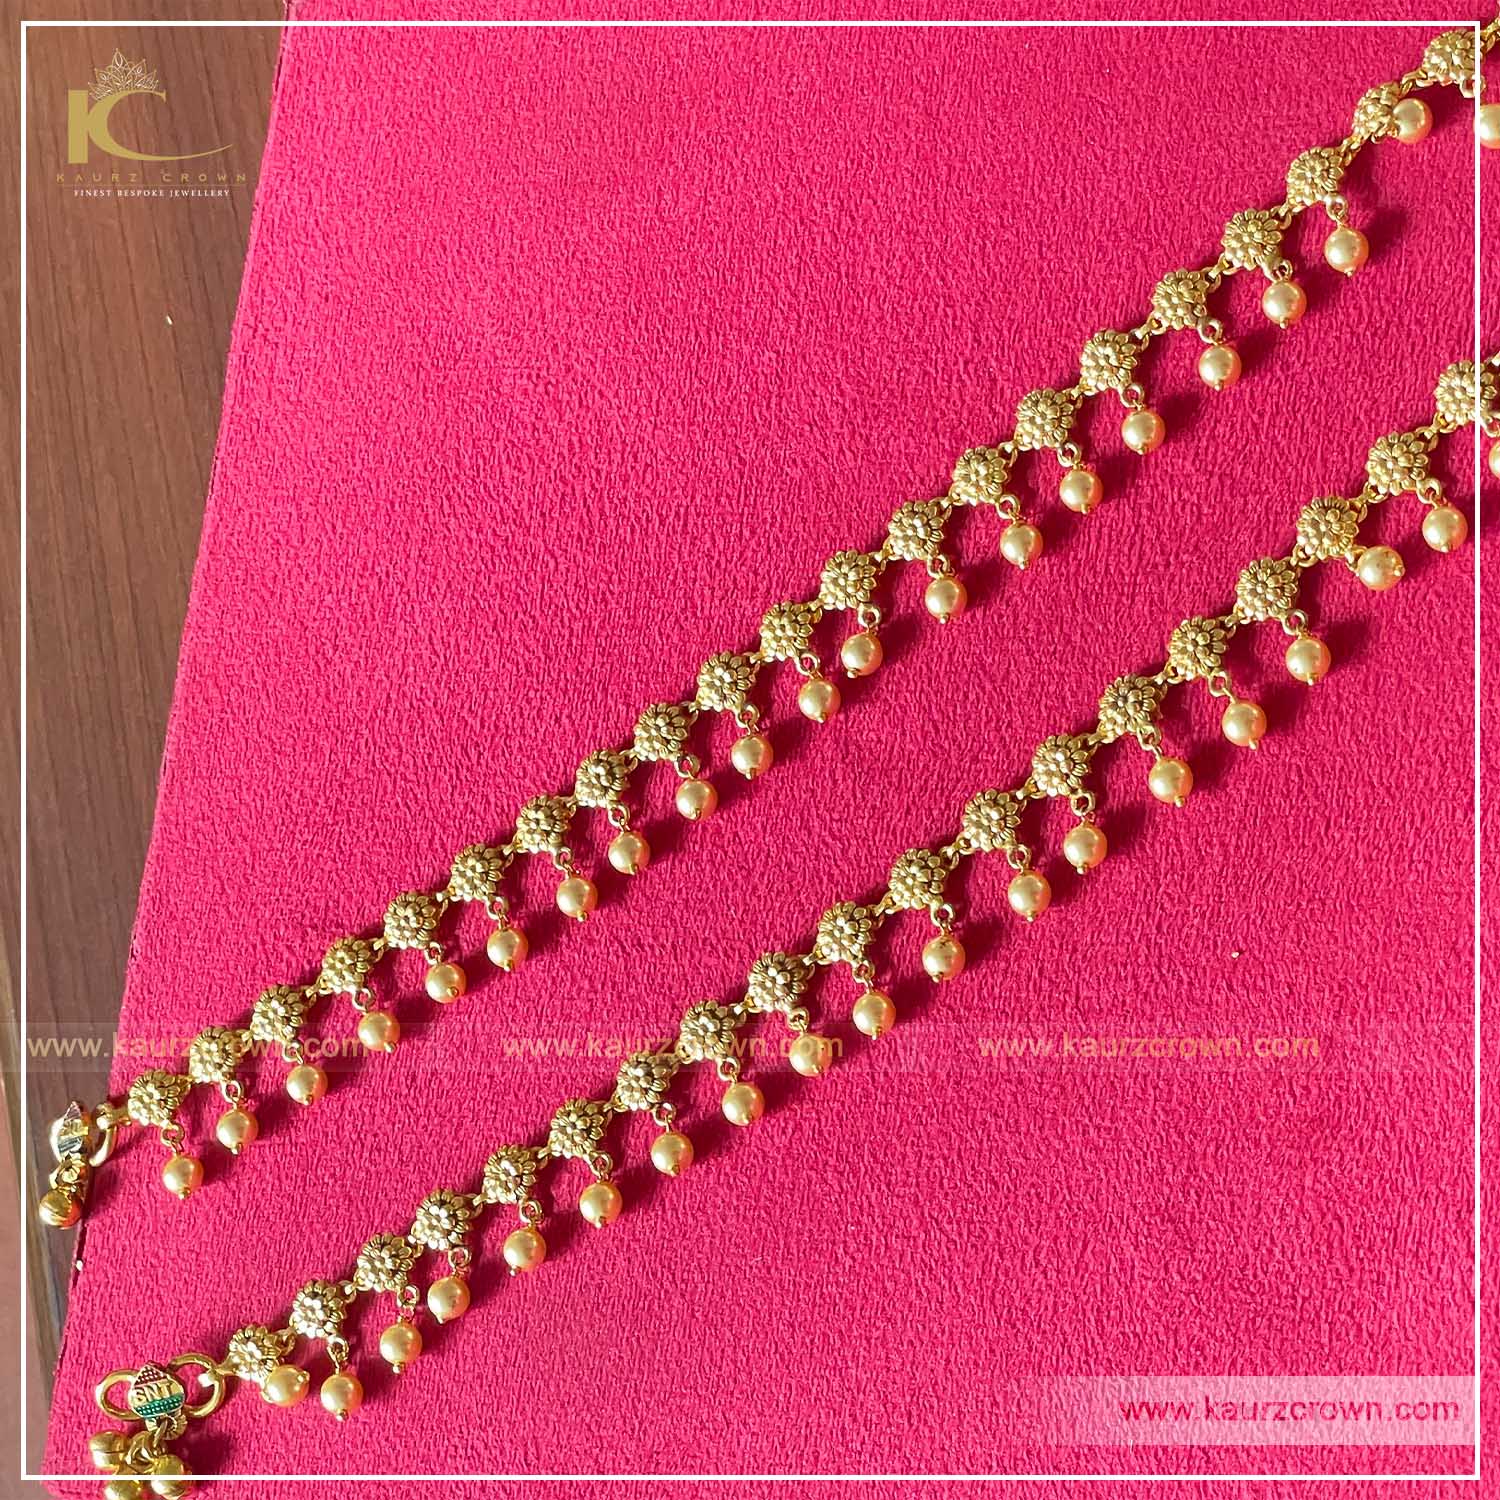 Liyakat Traditional Gold Plated Payal (Anklets) , Kaurz crown , punjabi jewellery , payal , anklets , online jewellery store